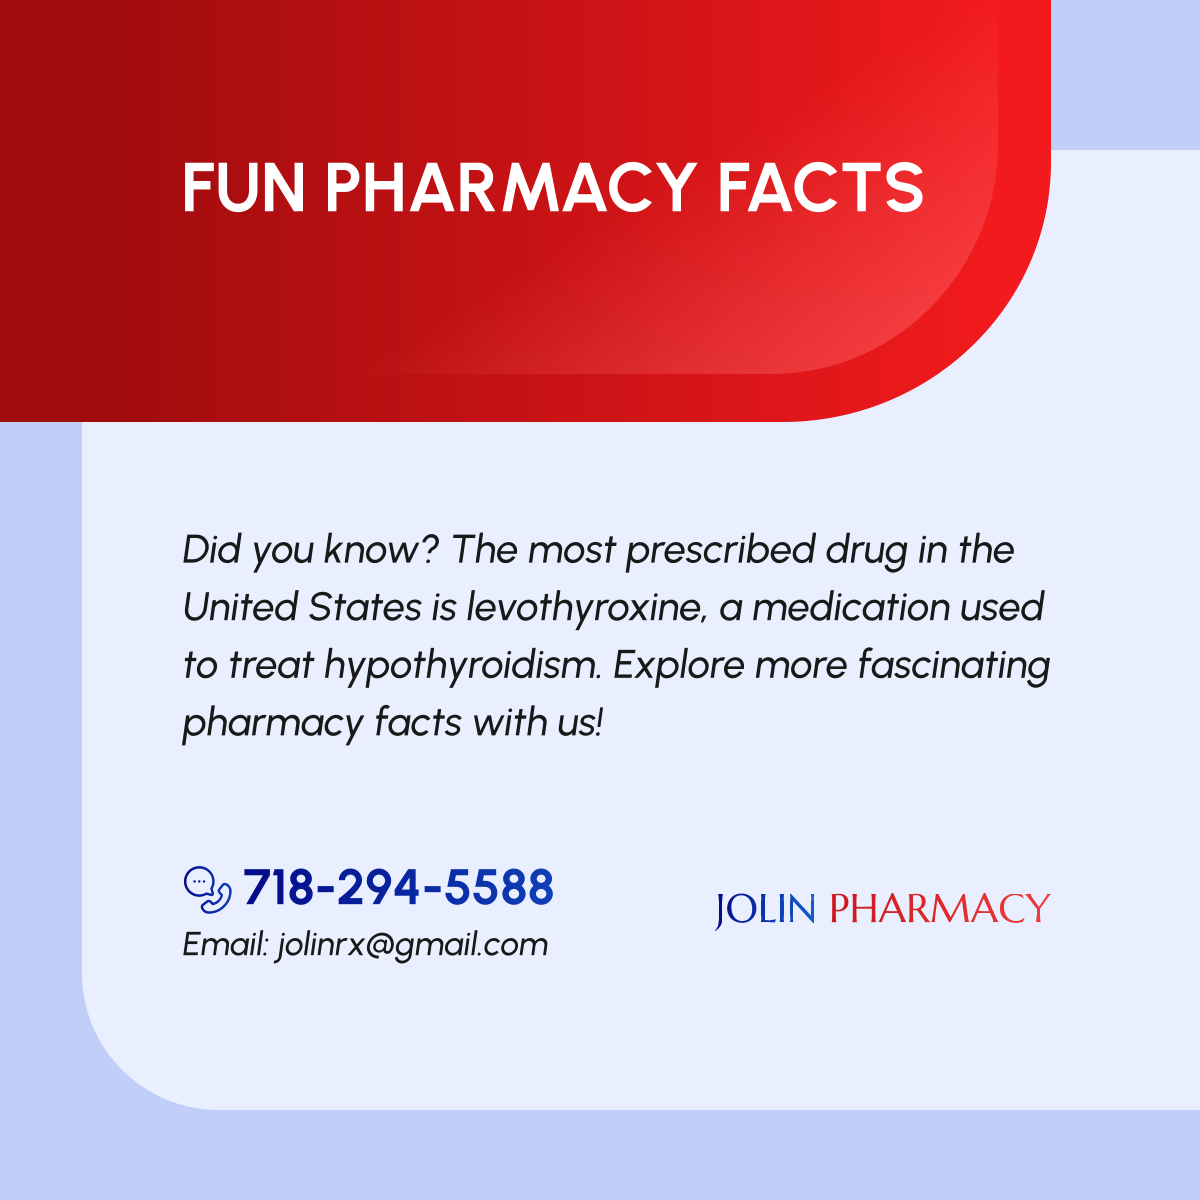 Discover fun pharmacy facts! Expand your knowledge and learn interesting tidbits about the world of pharmacy. 

#BronxNY #RetailPharmacy #PharmacyFun